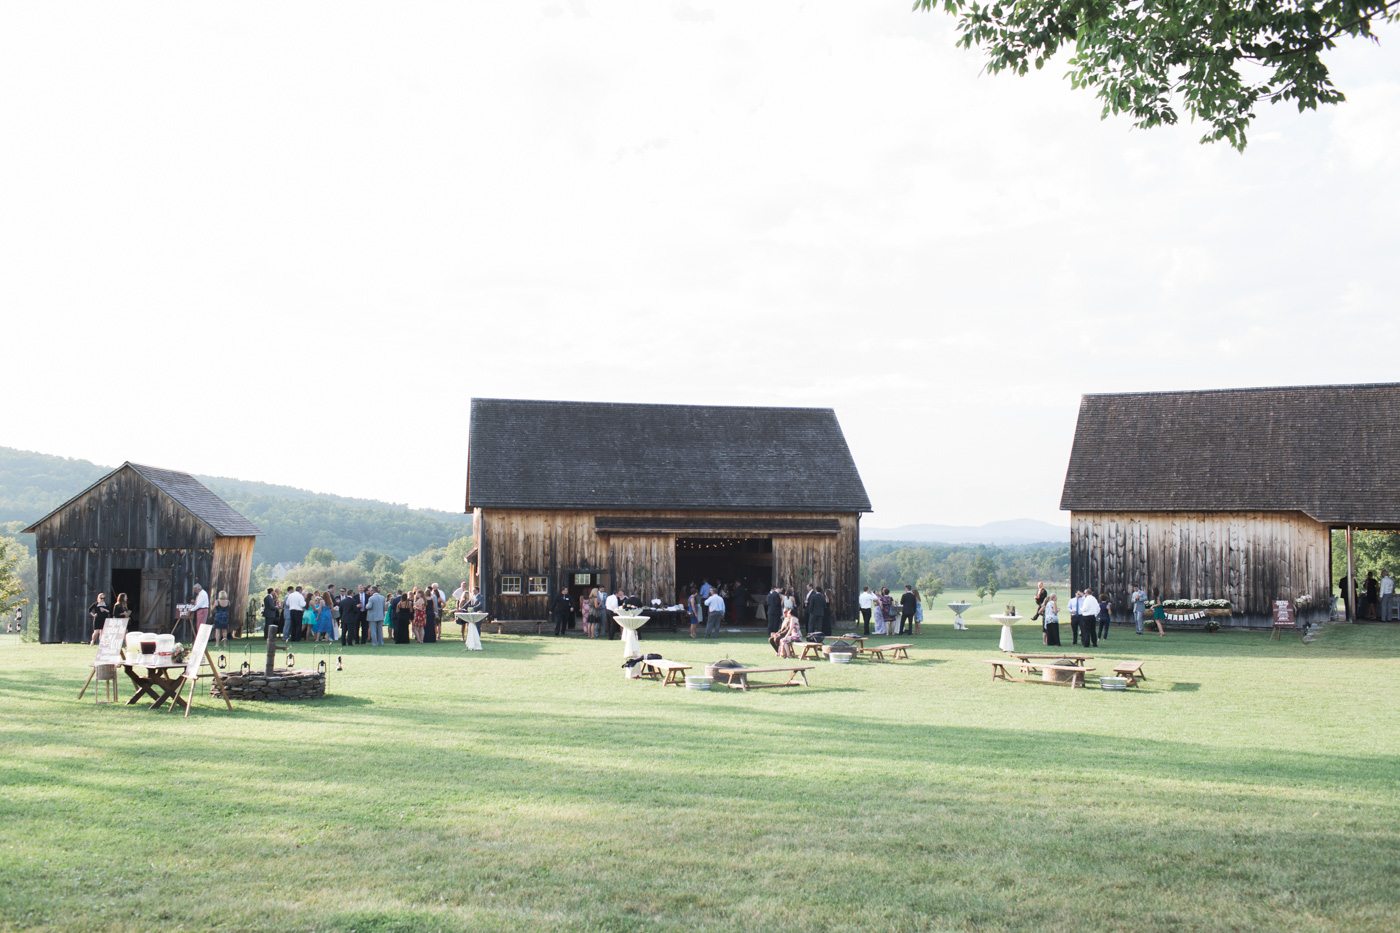 Award-winning wedding venue features three historic barns and beautifully manicured grounds, Chelsea Proulx Photography